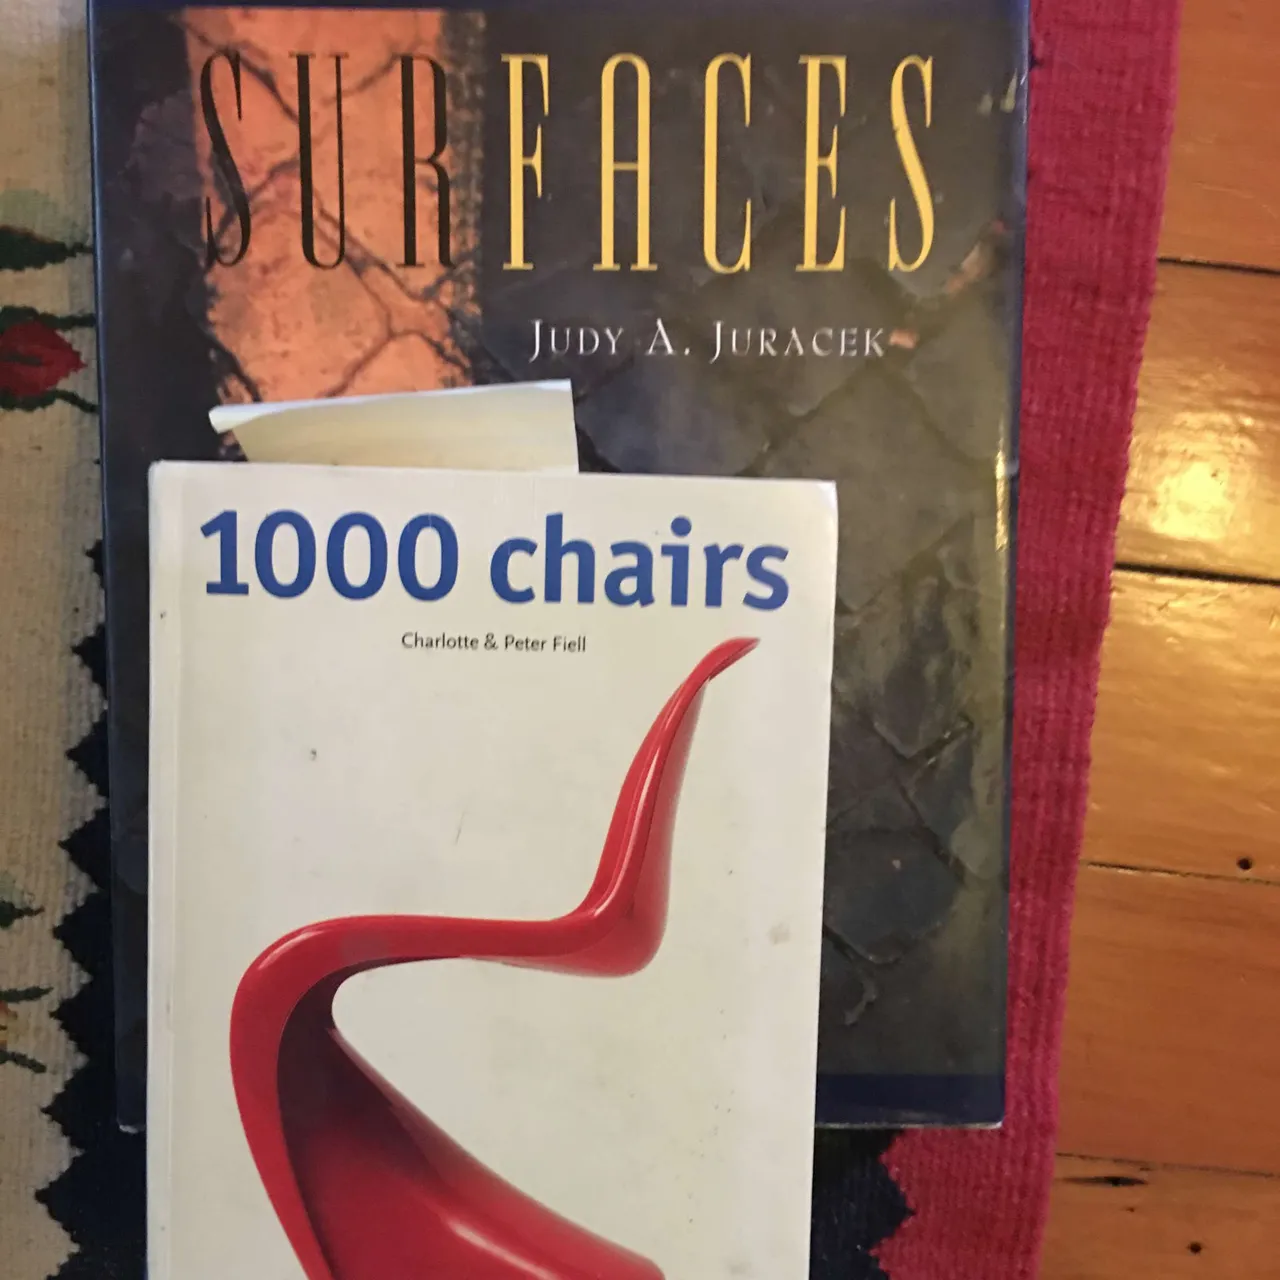 Design books: Surfaces and 1000 chairs photo 1